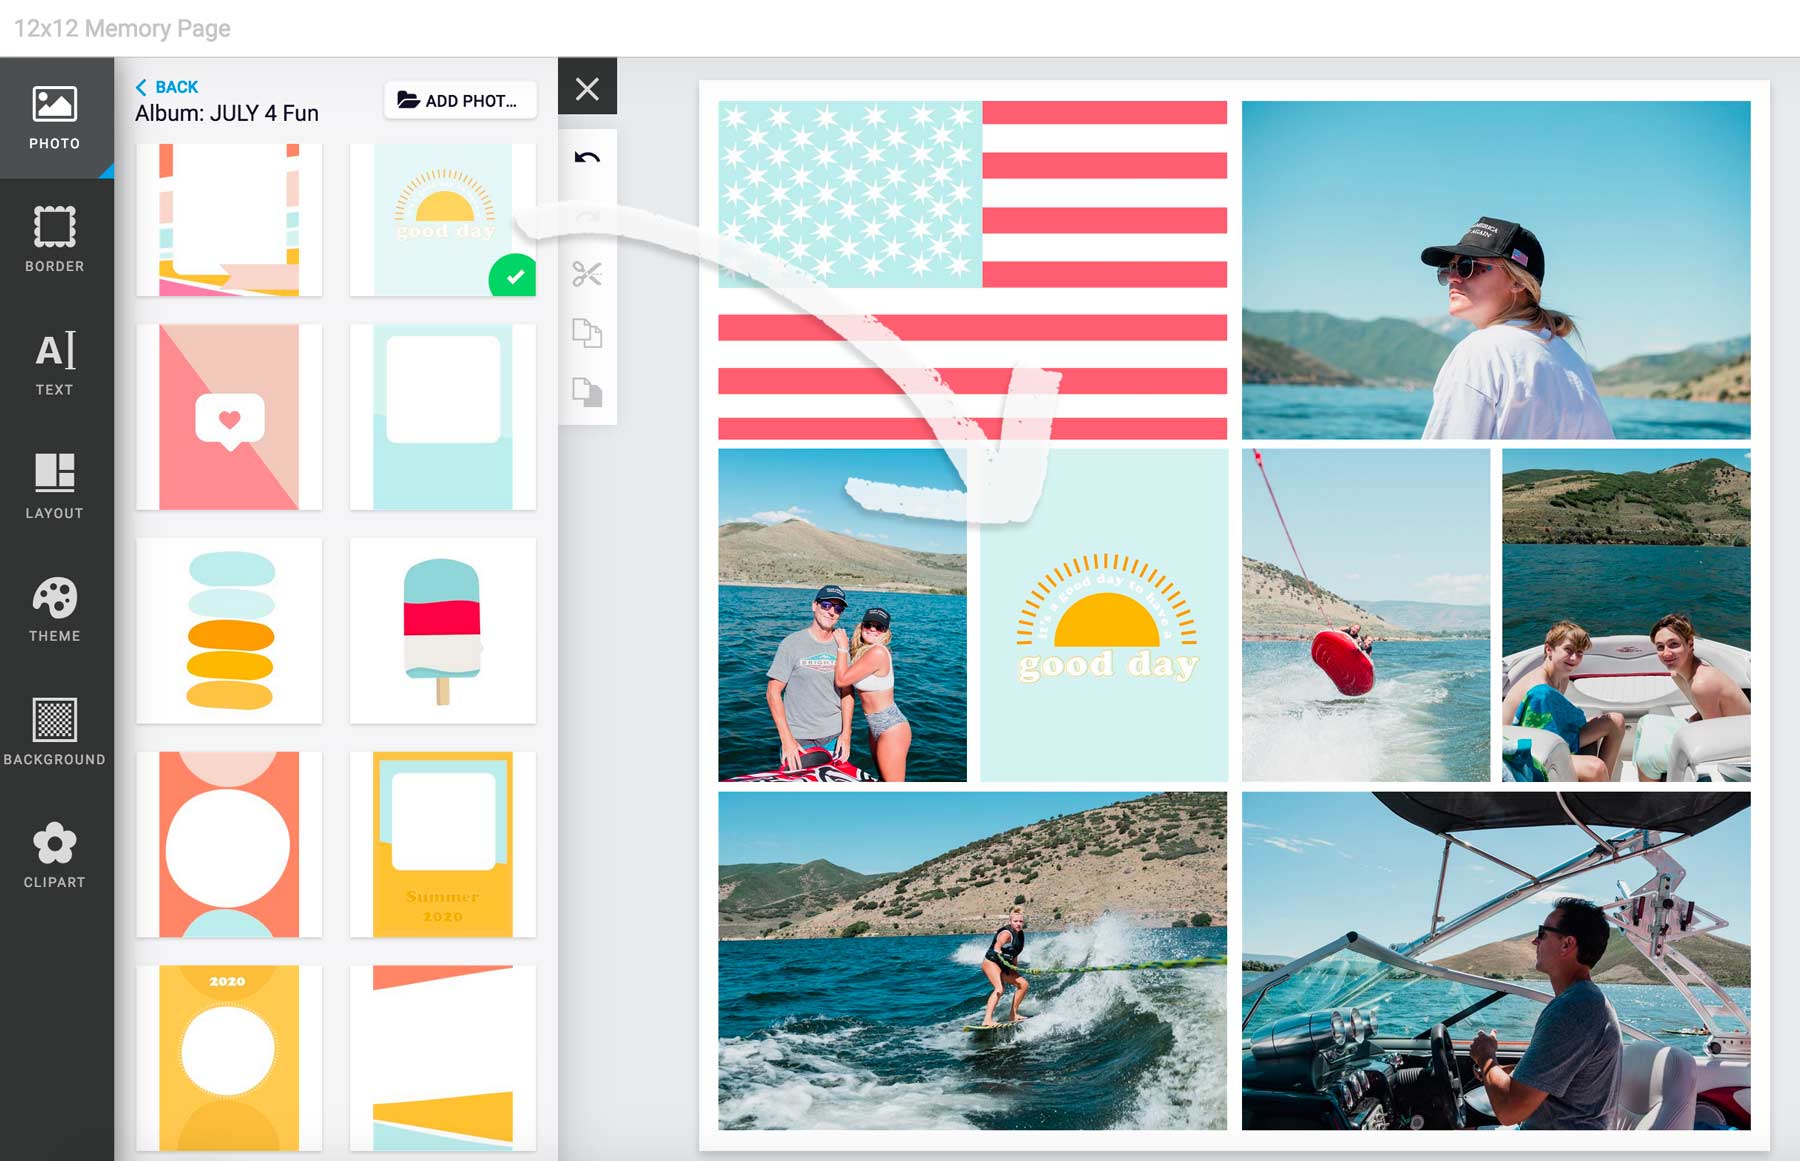 Document Your Summer - Free Prompt Cards and Designs